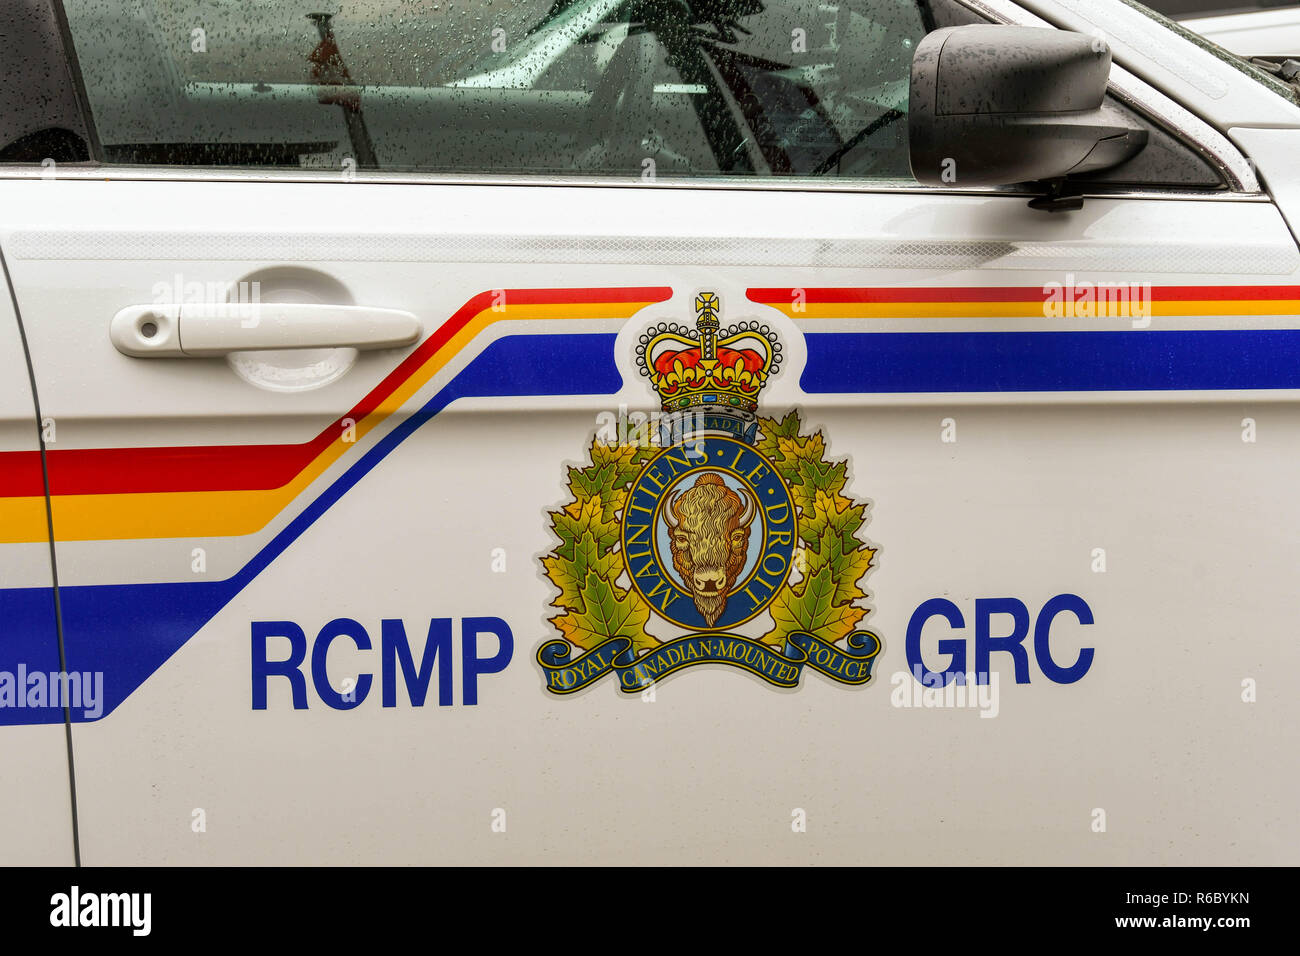 BANFF, ALBERTA, CANADA - MAY 2018: Close up view of the badge on the side of a Royal Canadian Mounted Police patrol car in Banff. Stock Photo